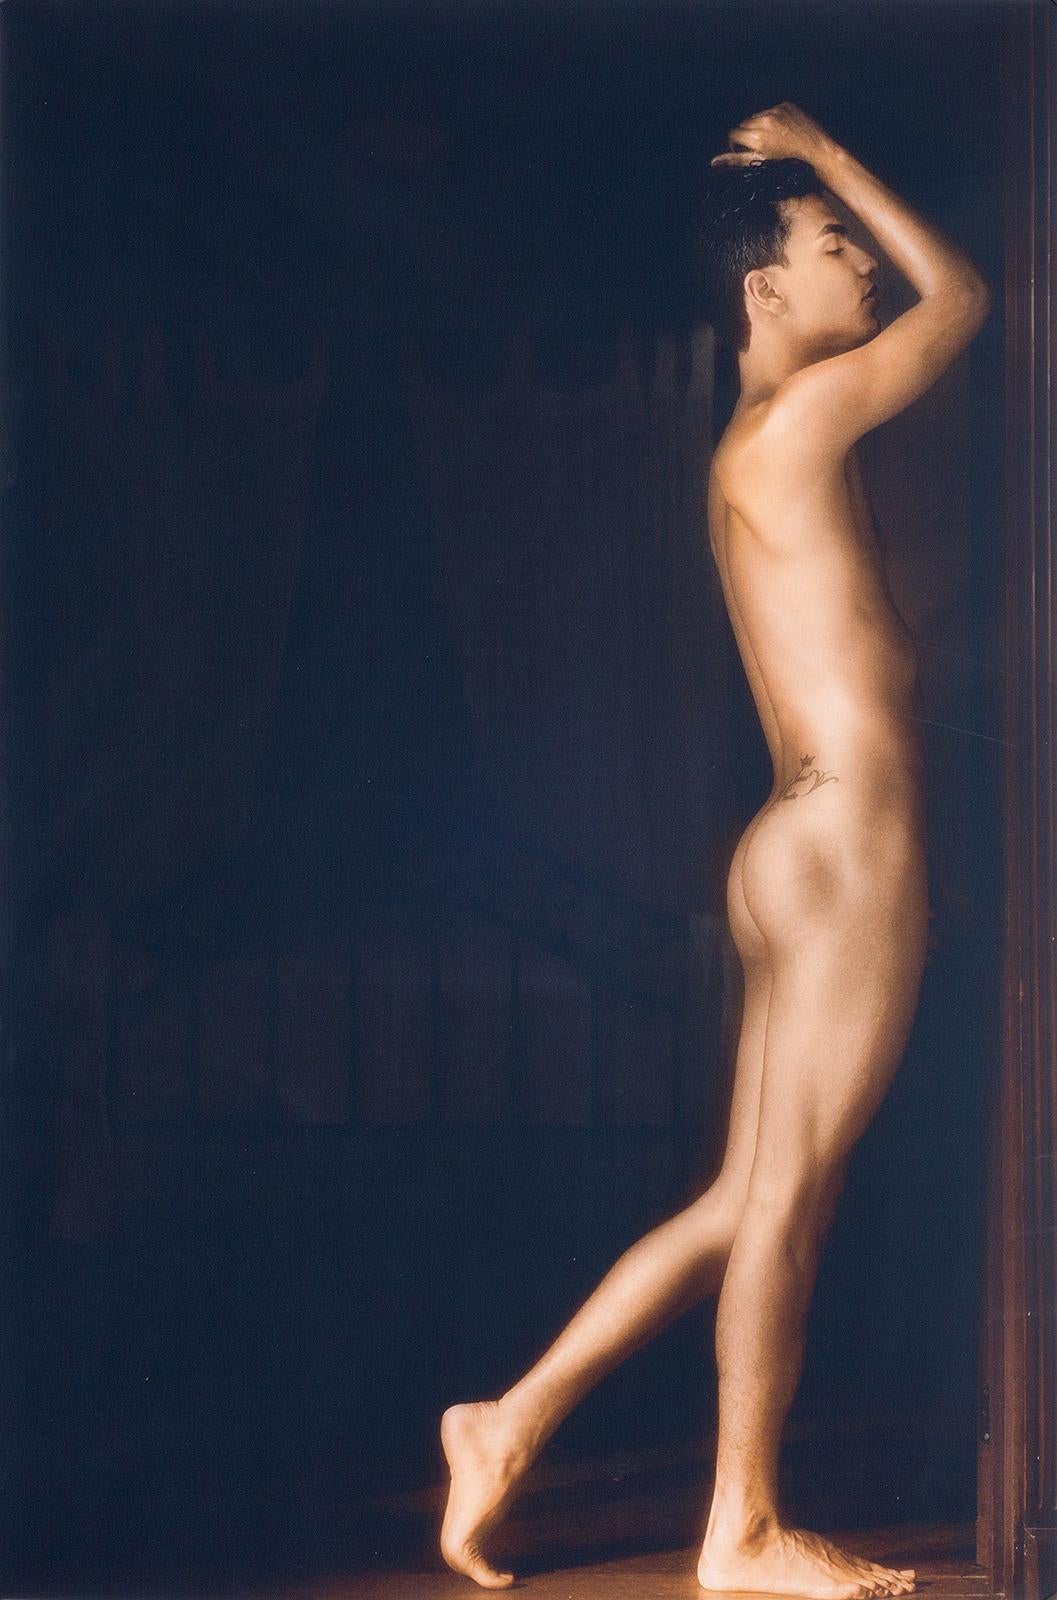 Benno Thoma Nude Photograph - Golden Boy (Nude model in amazing light of old Colonial house in Cali, Colombia)